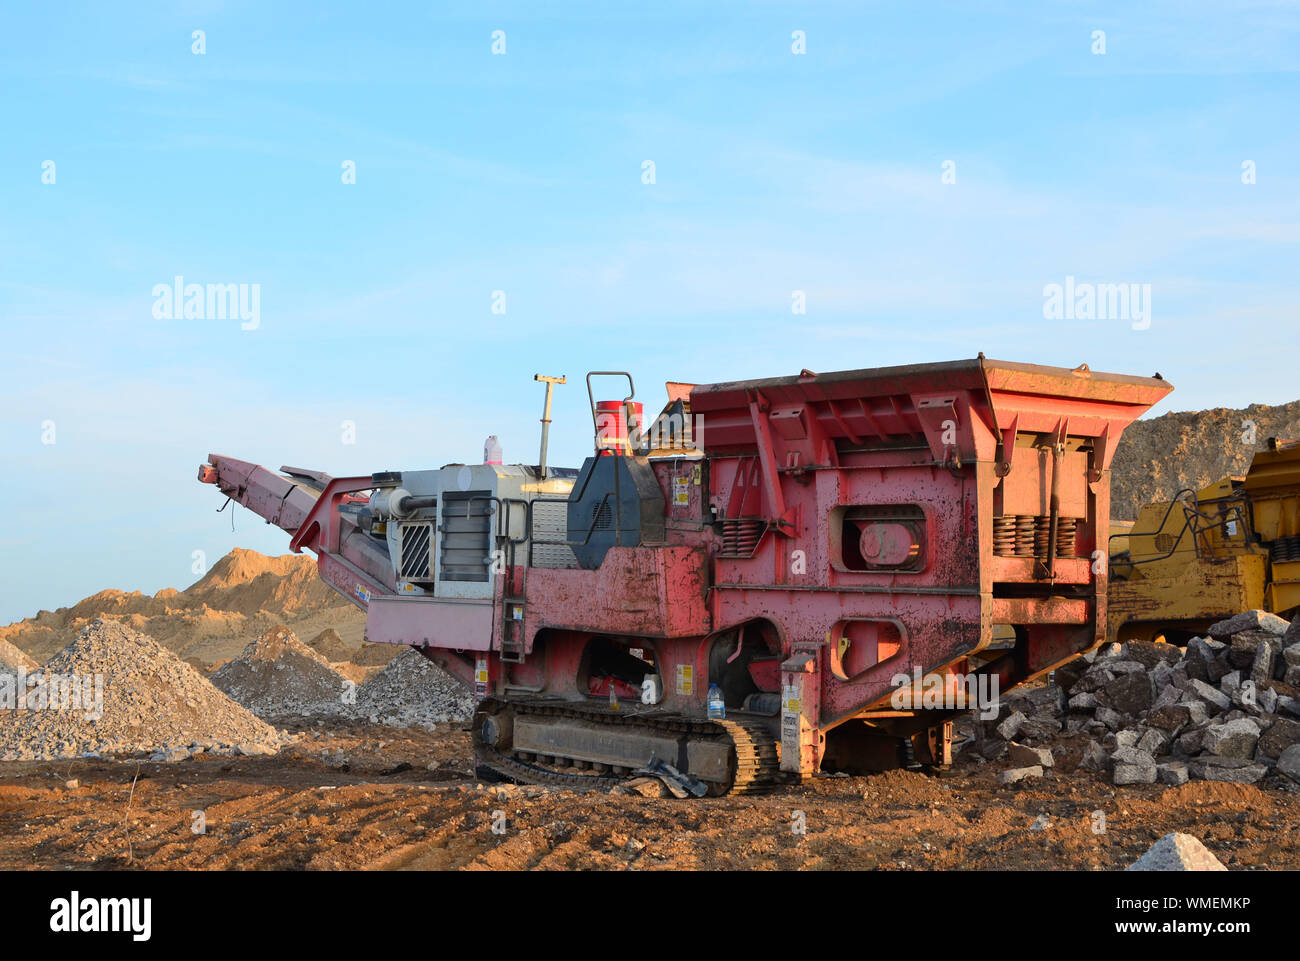 https://c8.alamy.com/comp/WMEMKP/mobile-stone-crusher-machine-by-the-construction-site-or-mining-quarry-for-crushing-old-concrete-slabs-into-gravel-and-subsequent-cement-production-WMEMKP.jpg